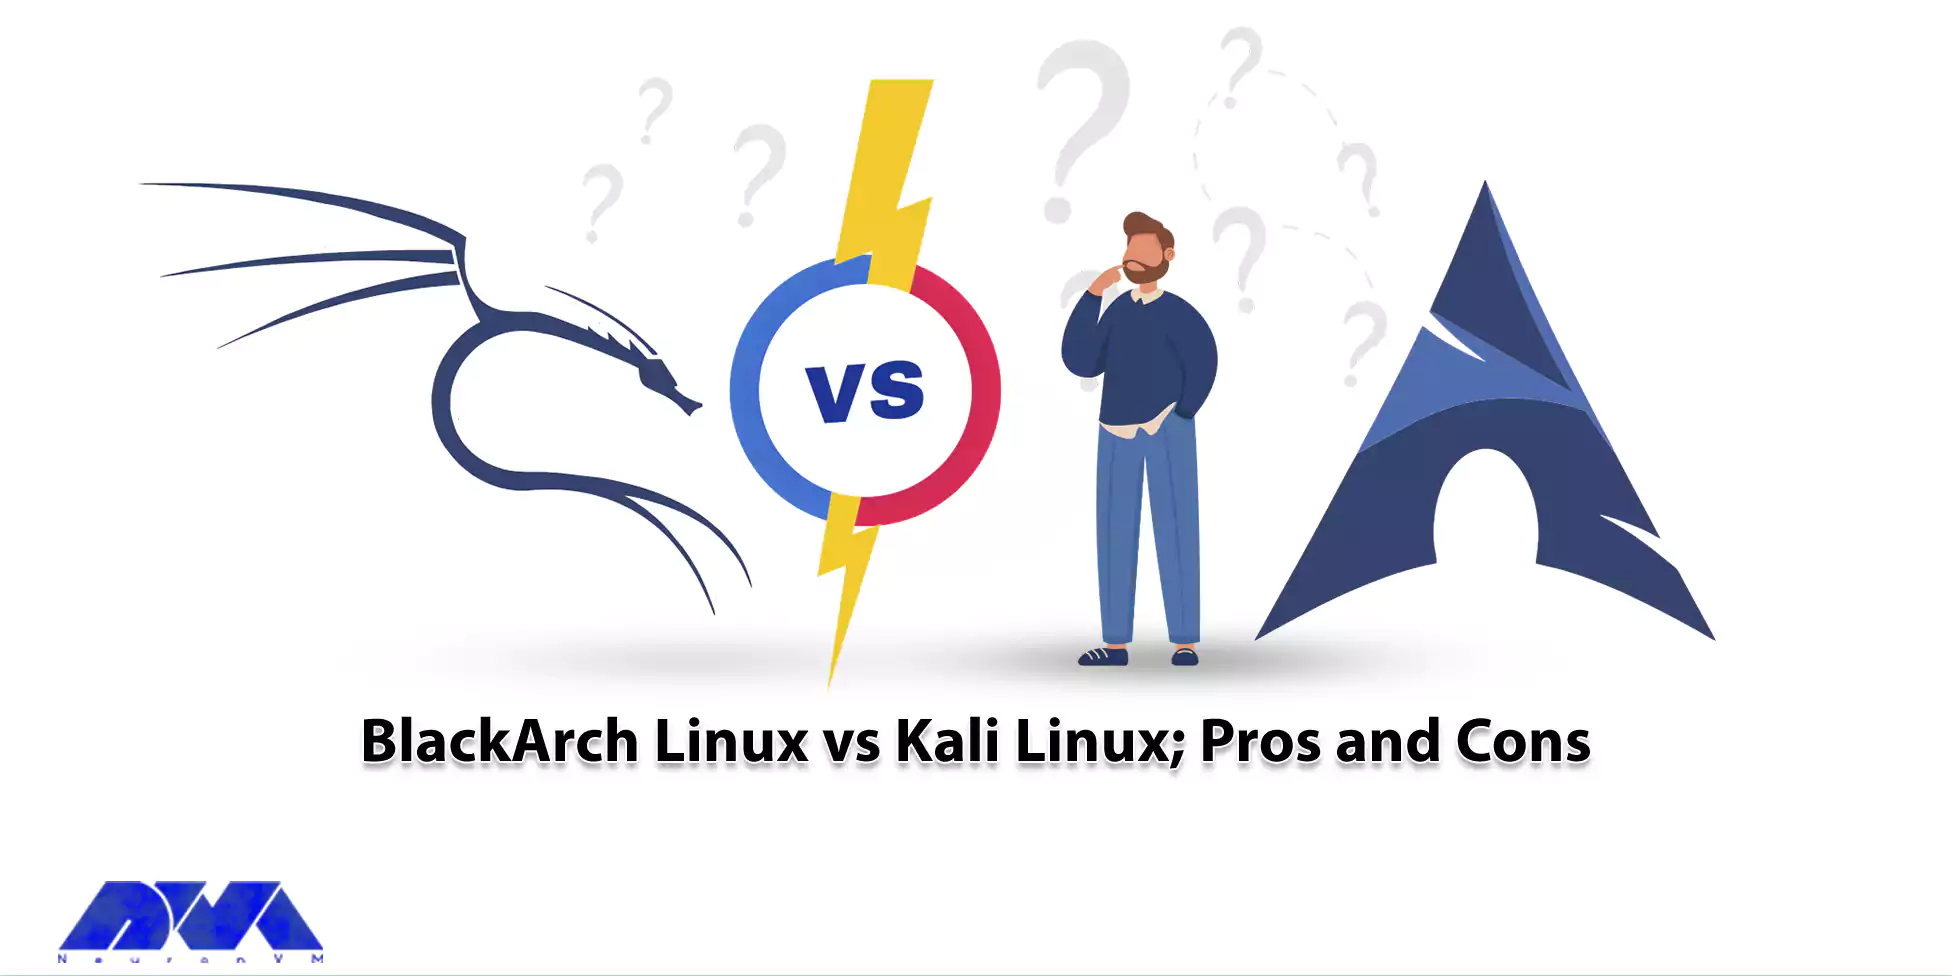 BlackArch Linux vs Kali Linux; Pros and Cons